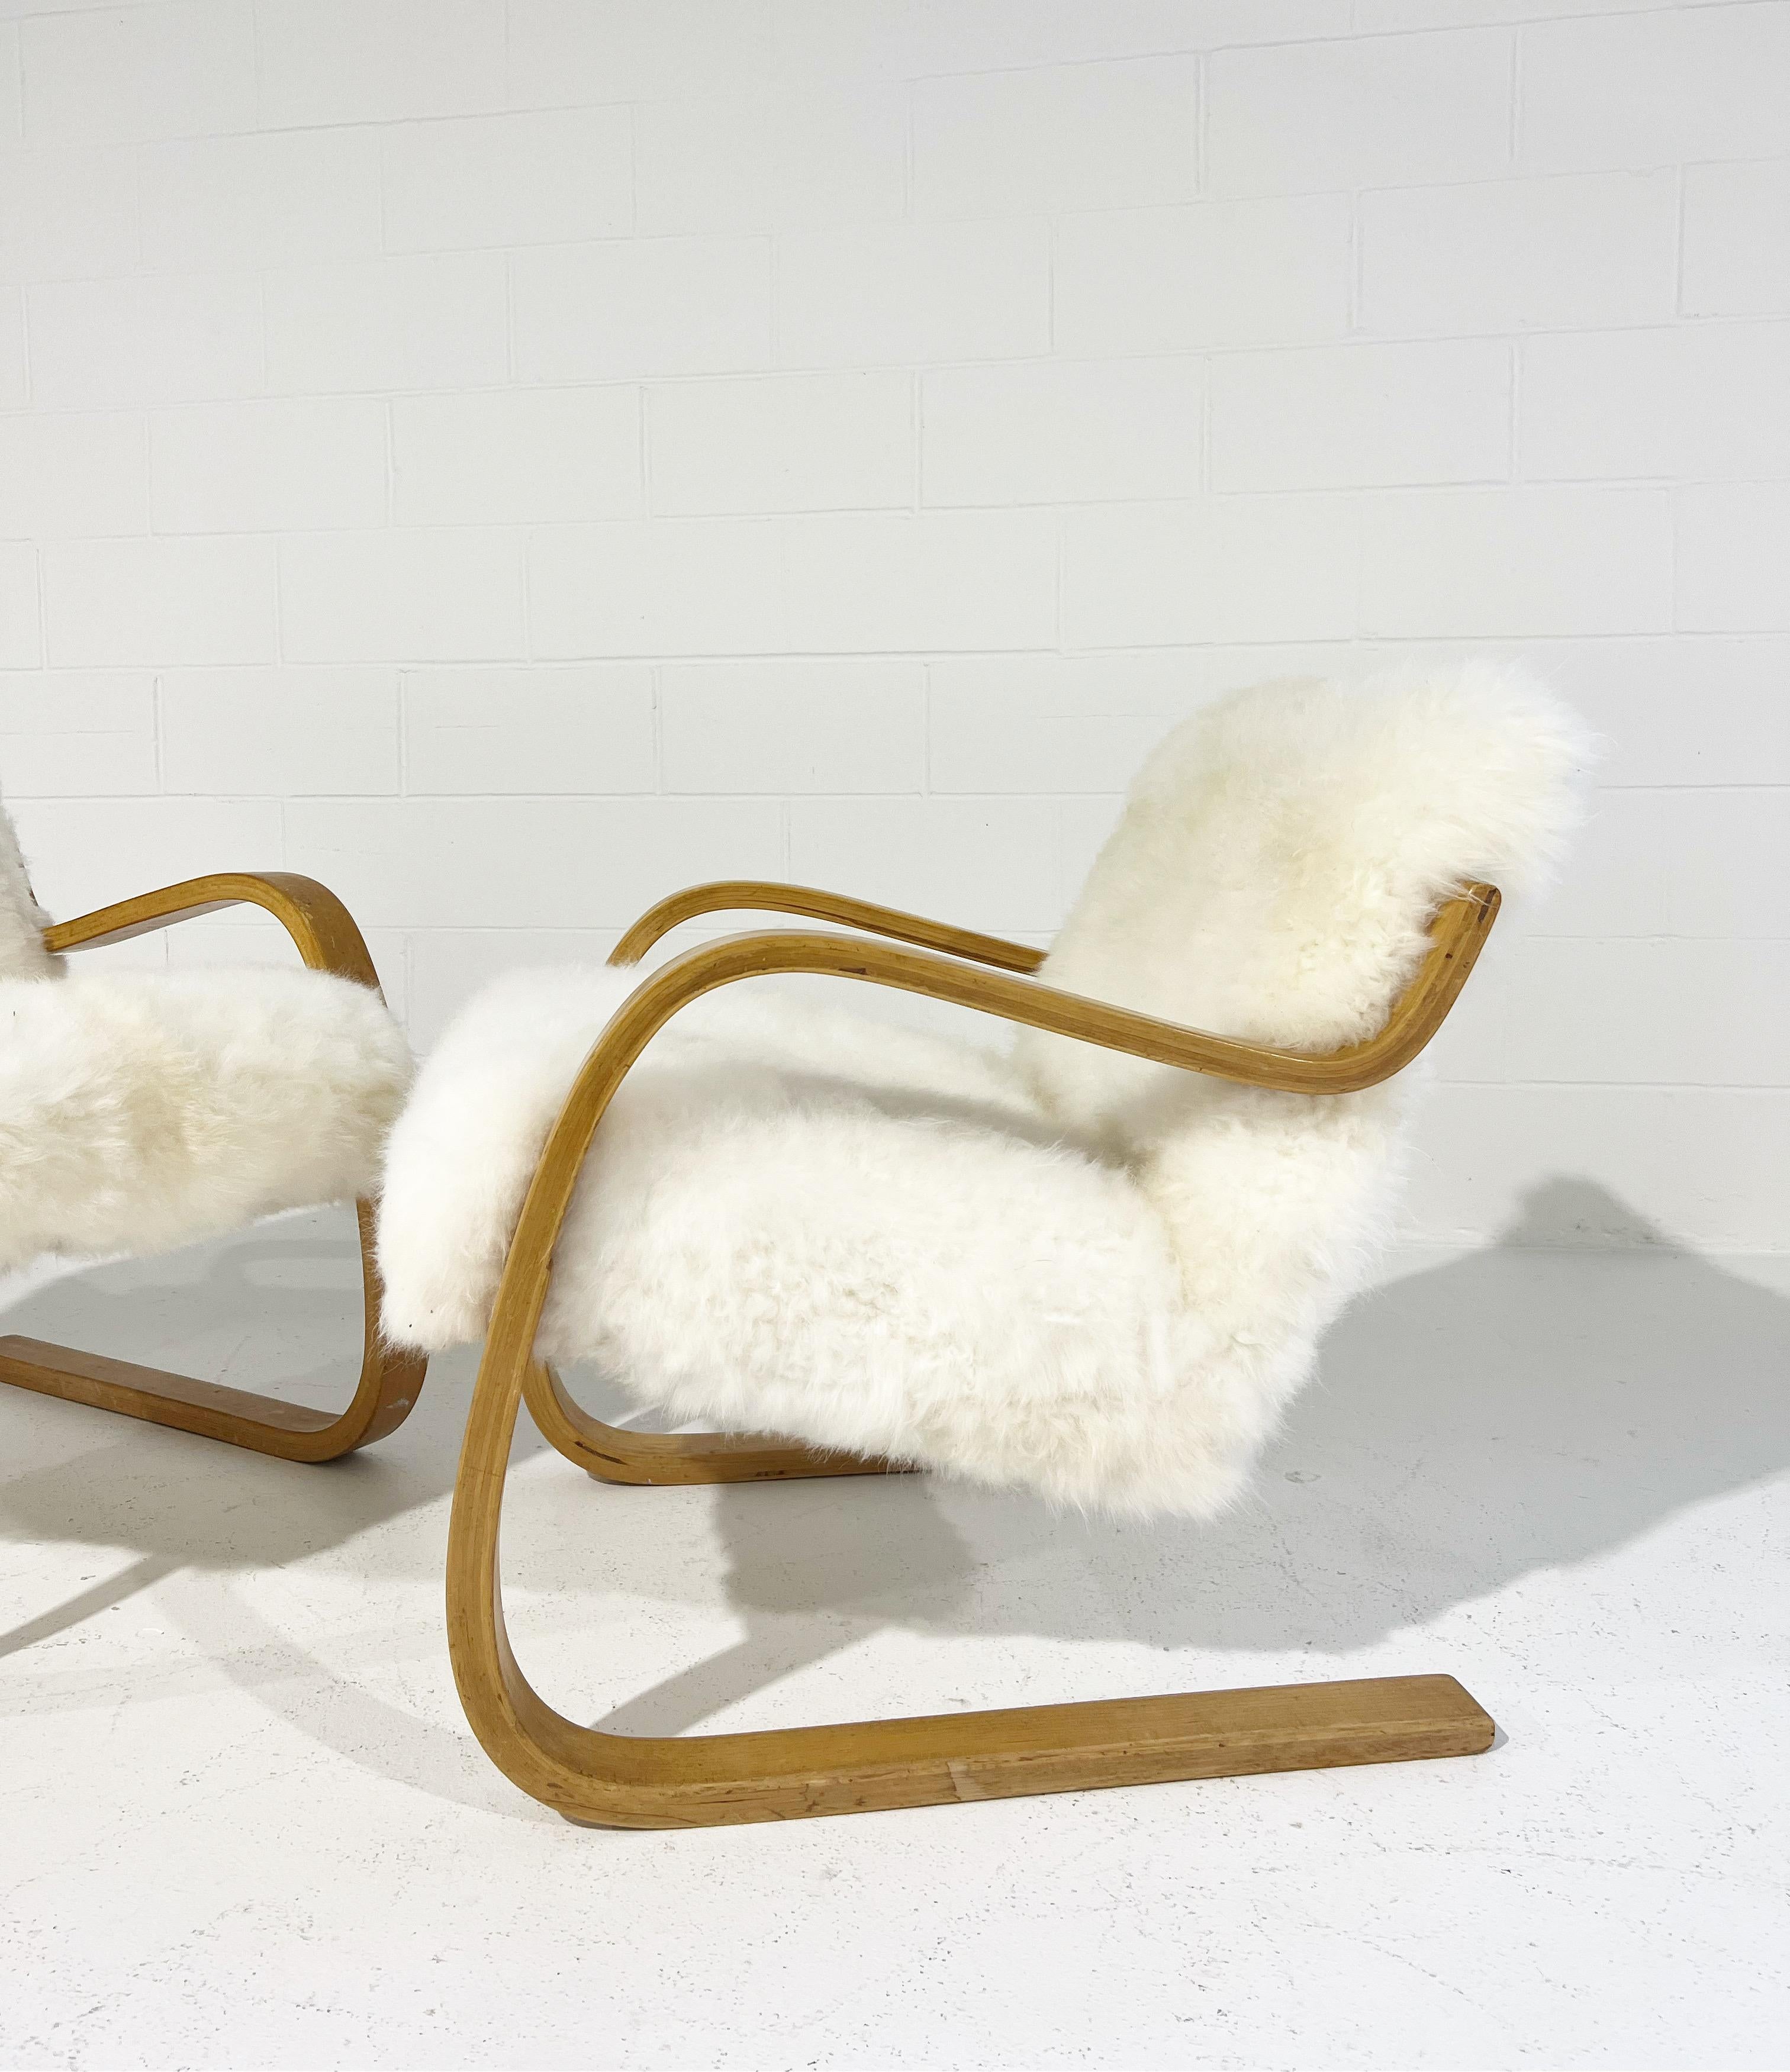 Finnish Alvar Aalto Model 34/402 Chairs in Cashmere Shearling